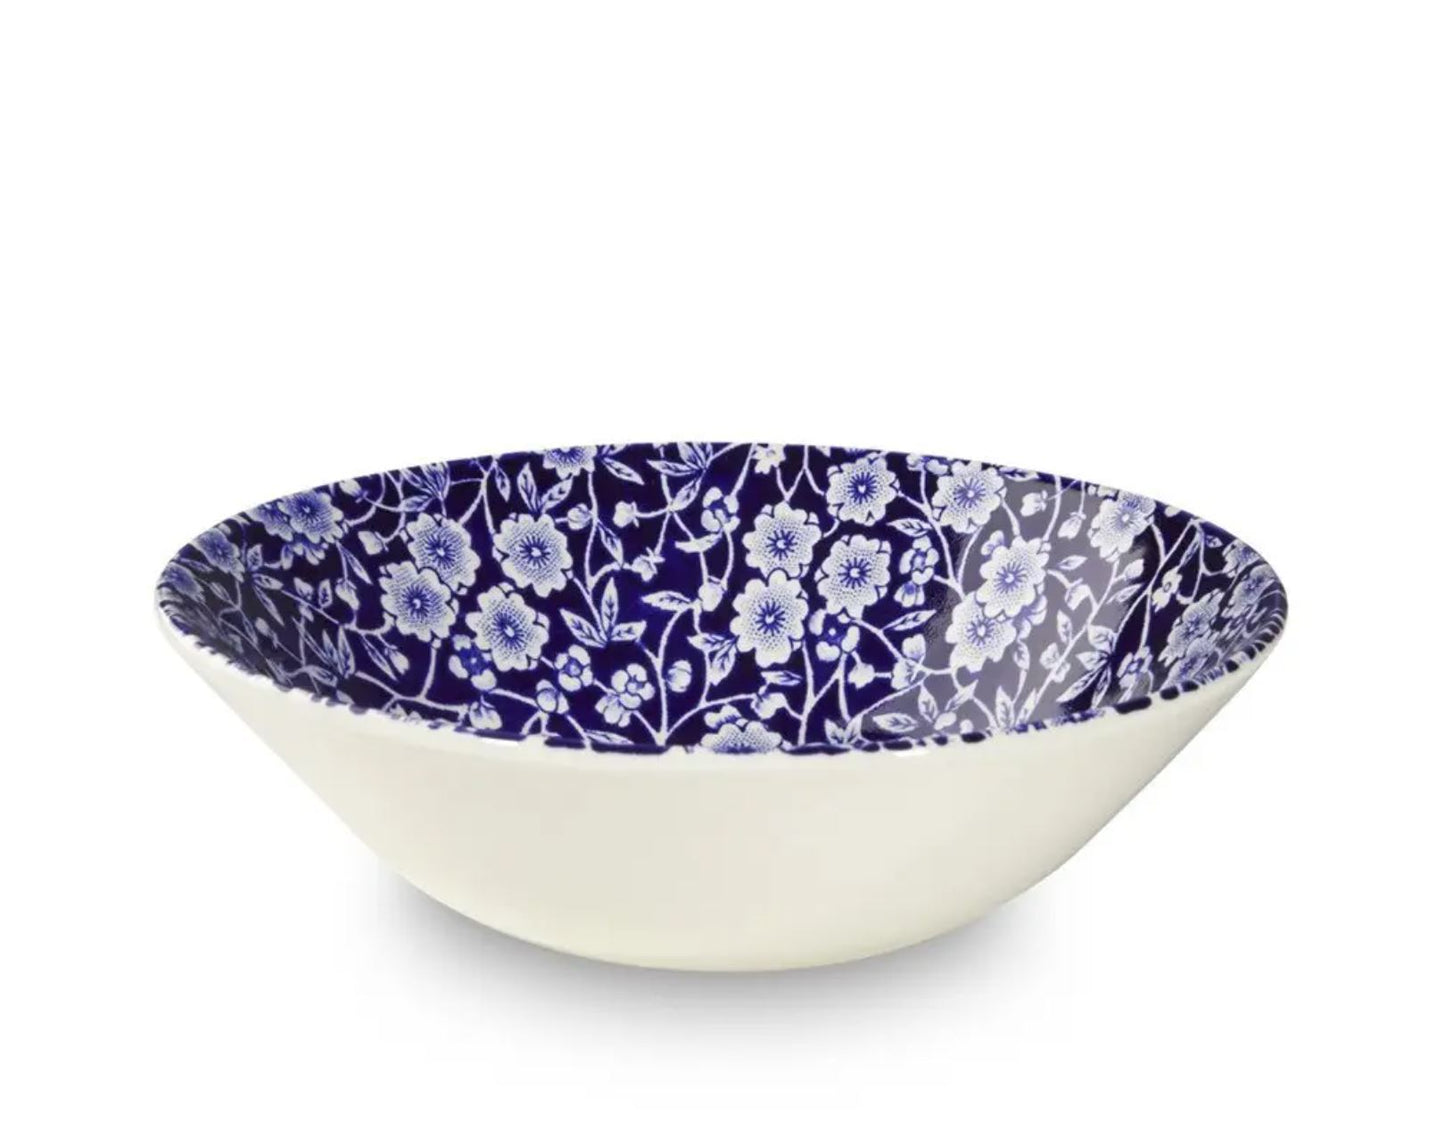 Blue Calico Cereal Bowl